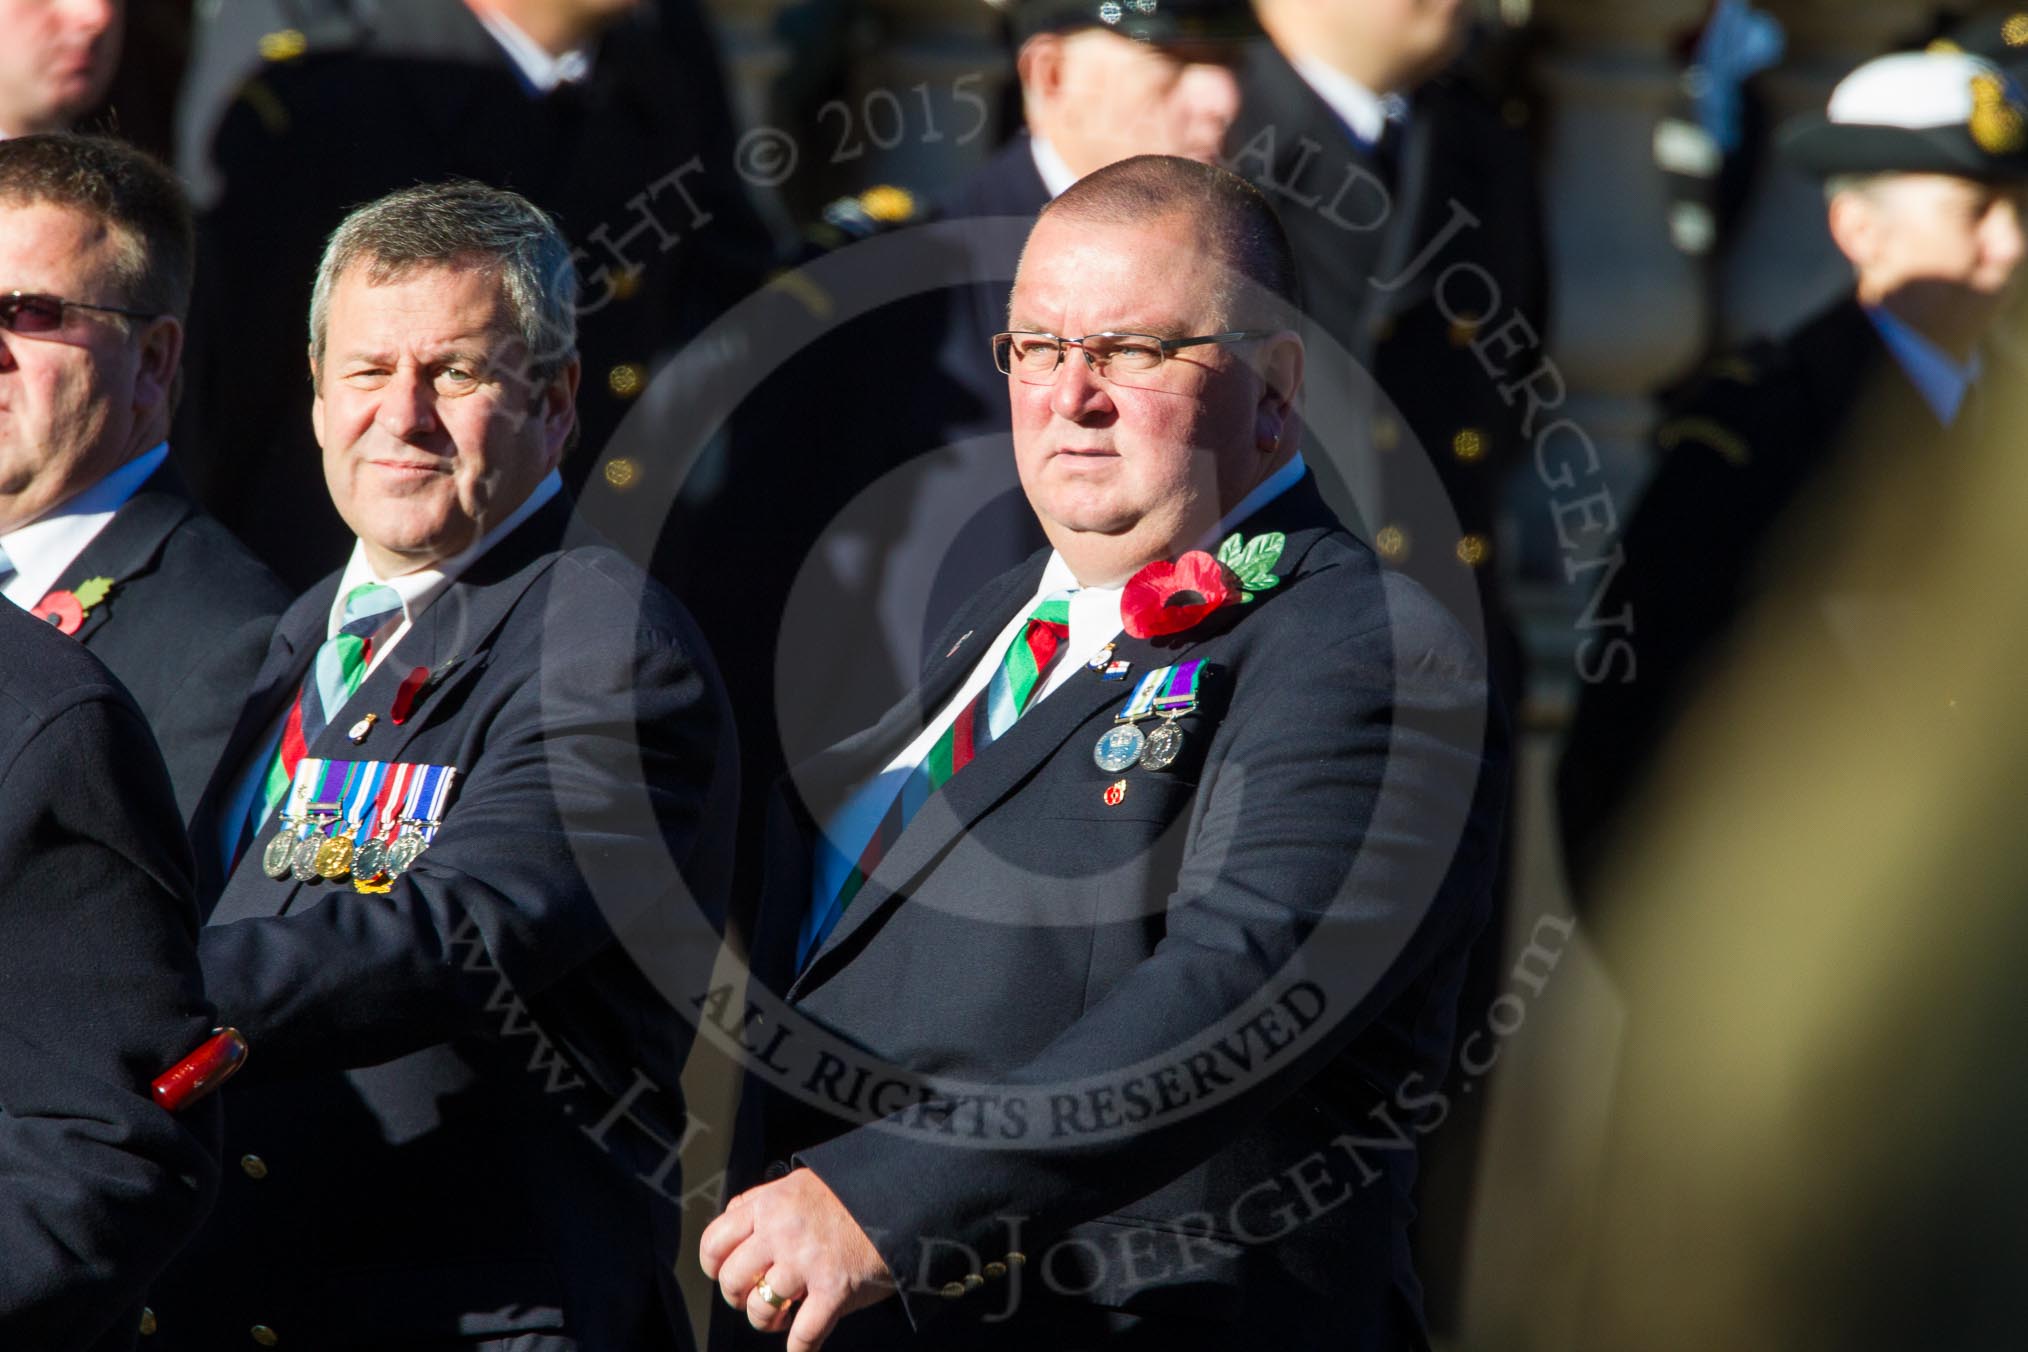 Remembrance Sunday Cenotaph March Past 2013: D23 - South Atlantic Medal Association (SAMA 82): The South Atlantic Medal (1982) is the official name of the medal awarded to almost 30,000 service men and women - and civilians - who took part in the campaign to liberate the Falkland Islands in 1982. The South Atlantic Medal Association is their Association..
Press stand opposite the Foreign Office building, Whitehall, London SW1,
London,
Greater London,
United Kingdom,
on 10 November 2013 at 11:41, image #190